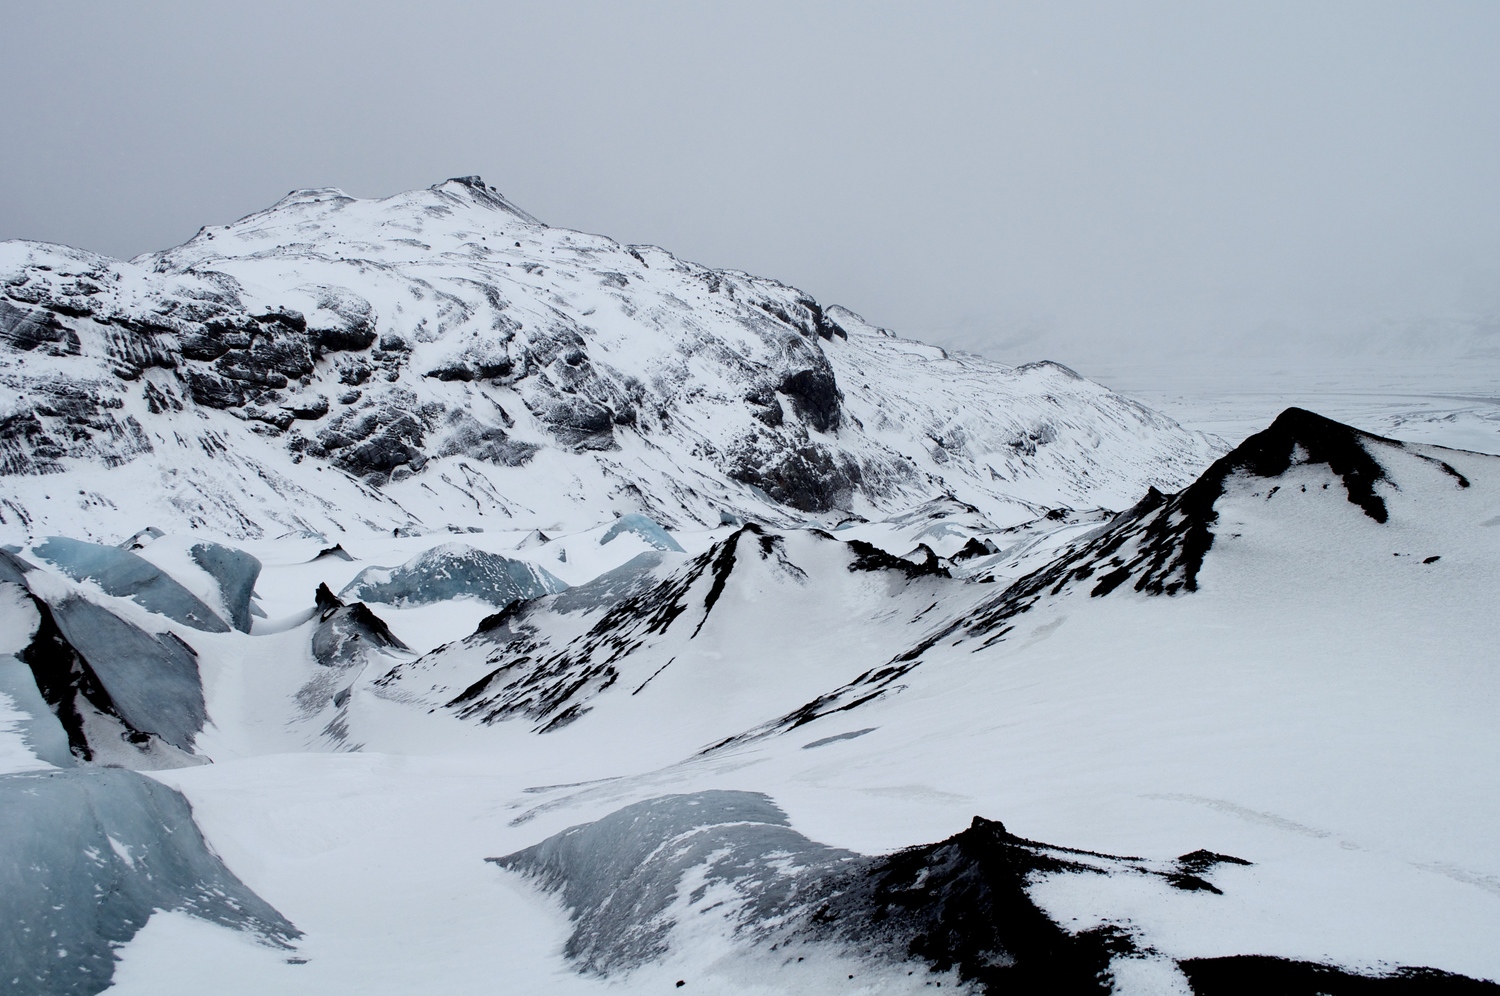 The part of the glacier the guides call "Mordor" because other ashy peaks from past volcanic eruptions.